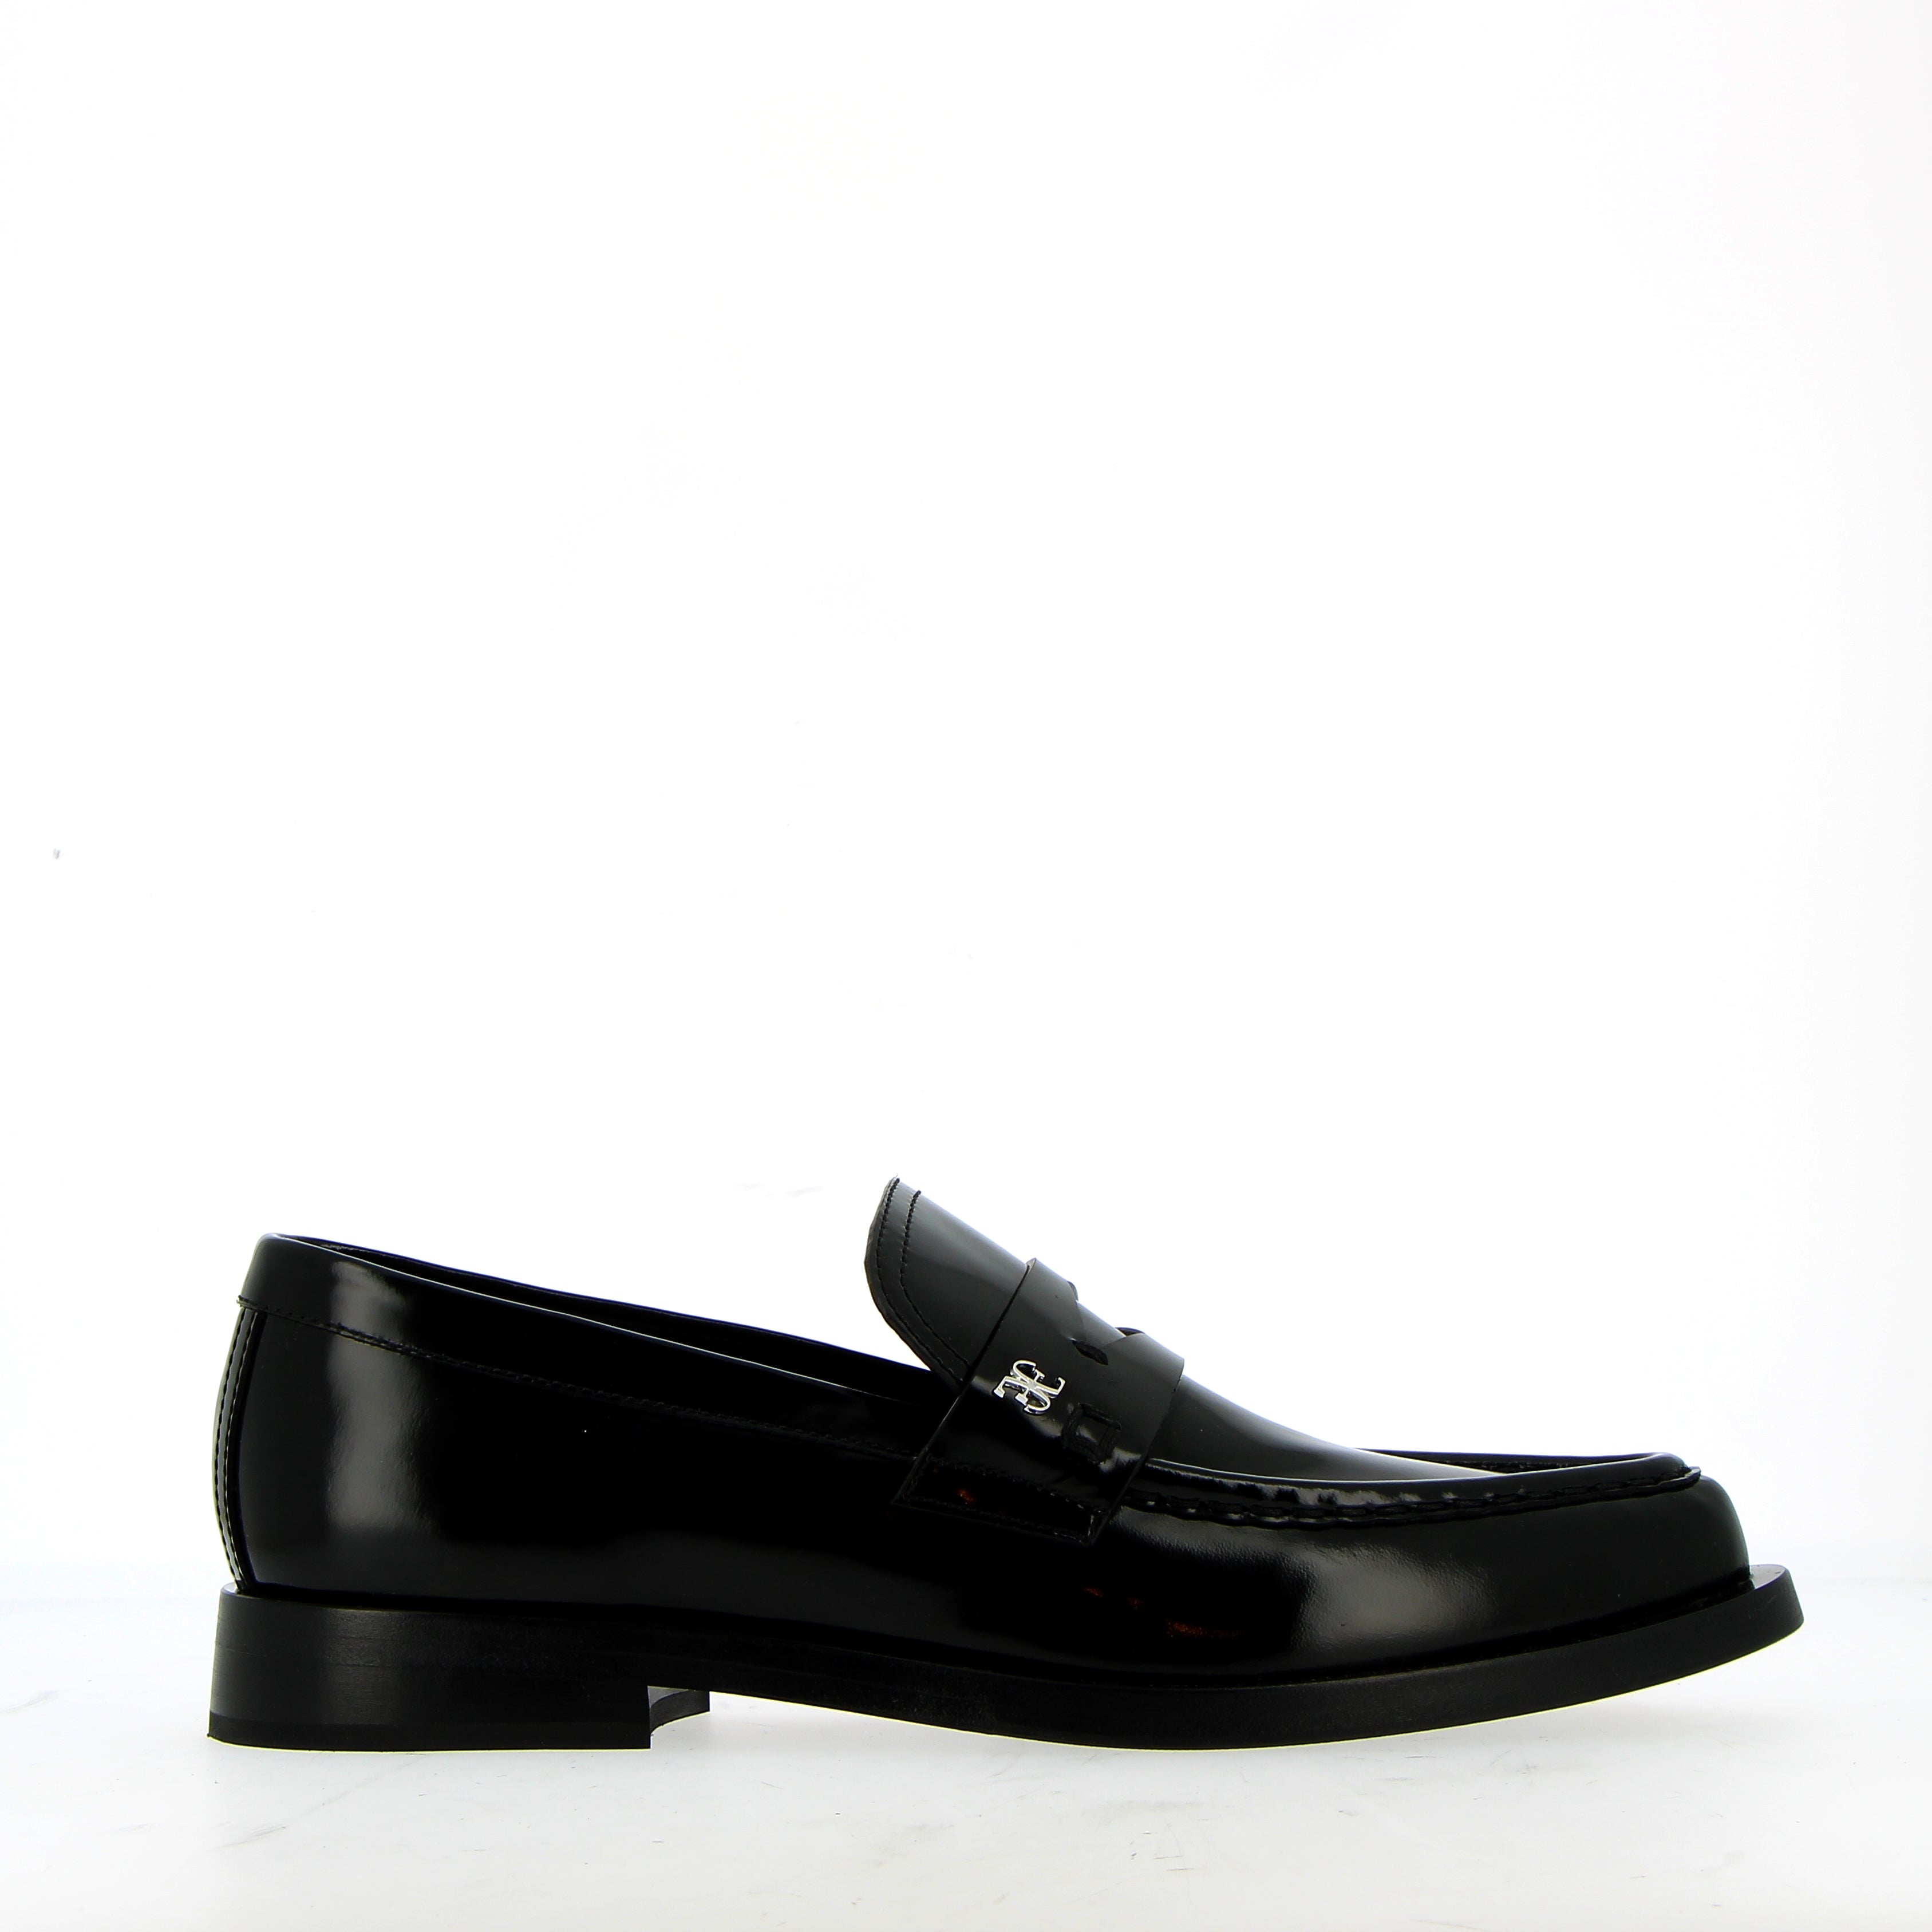 Black leather pointed loafer